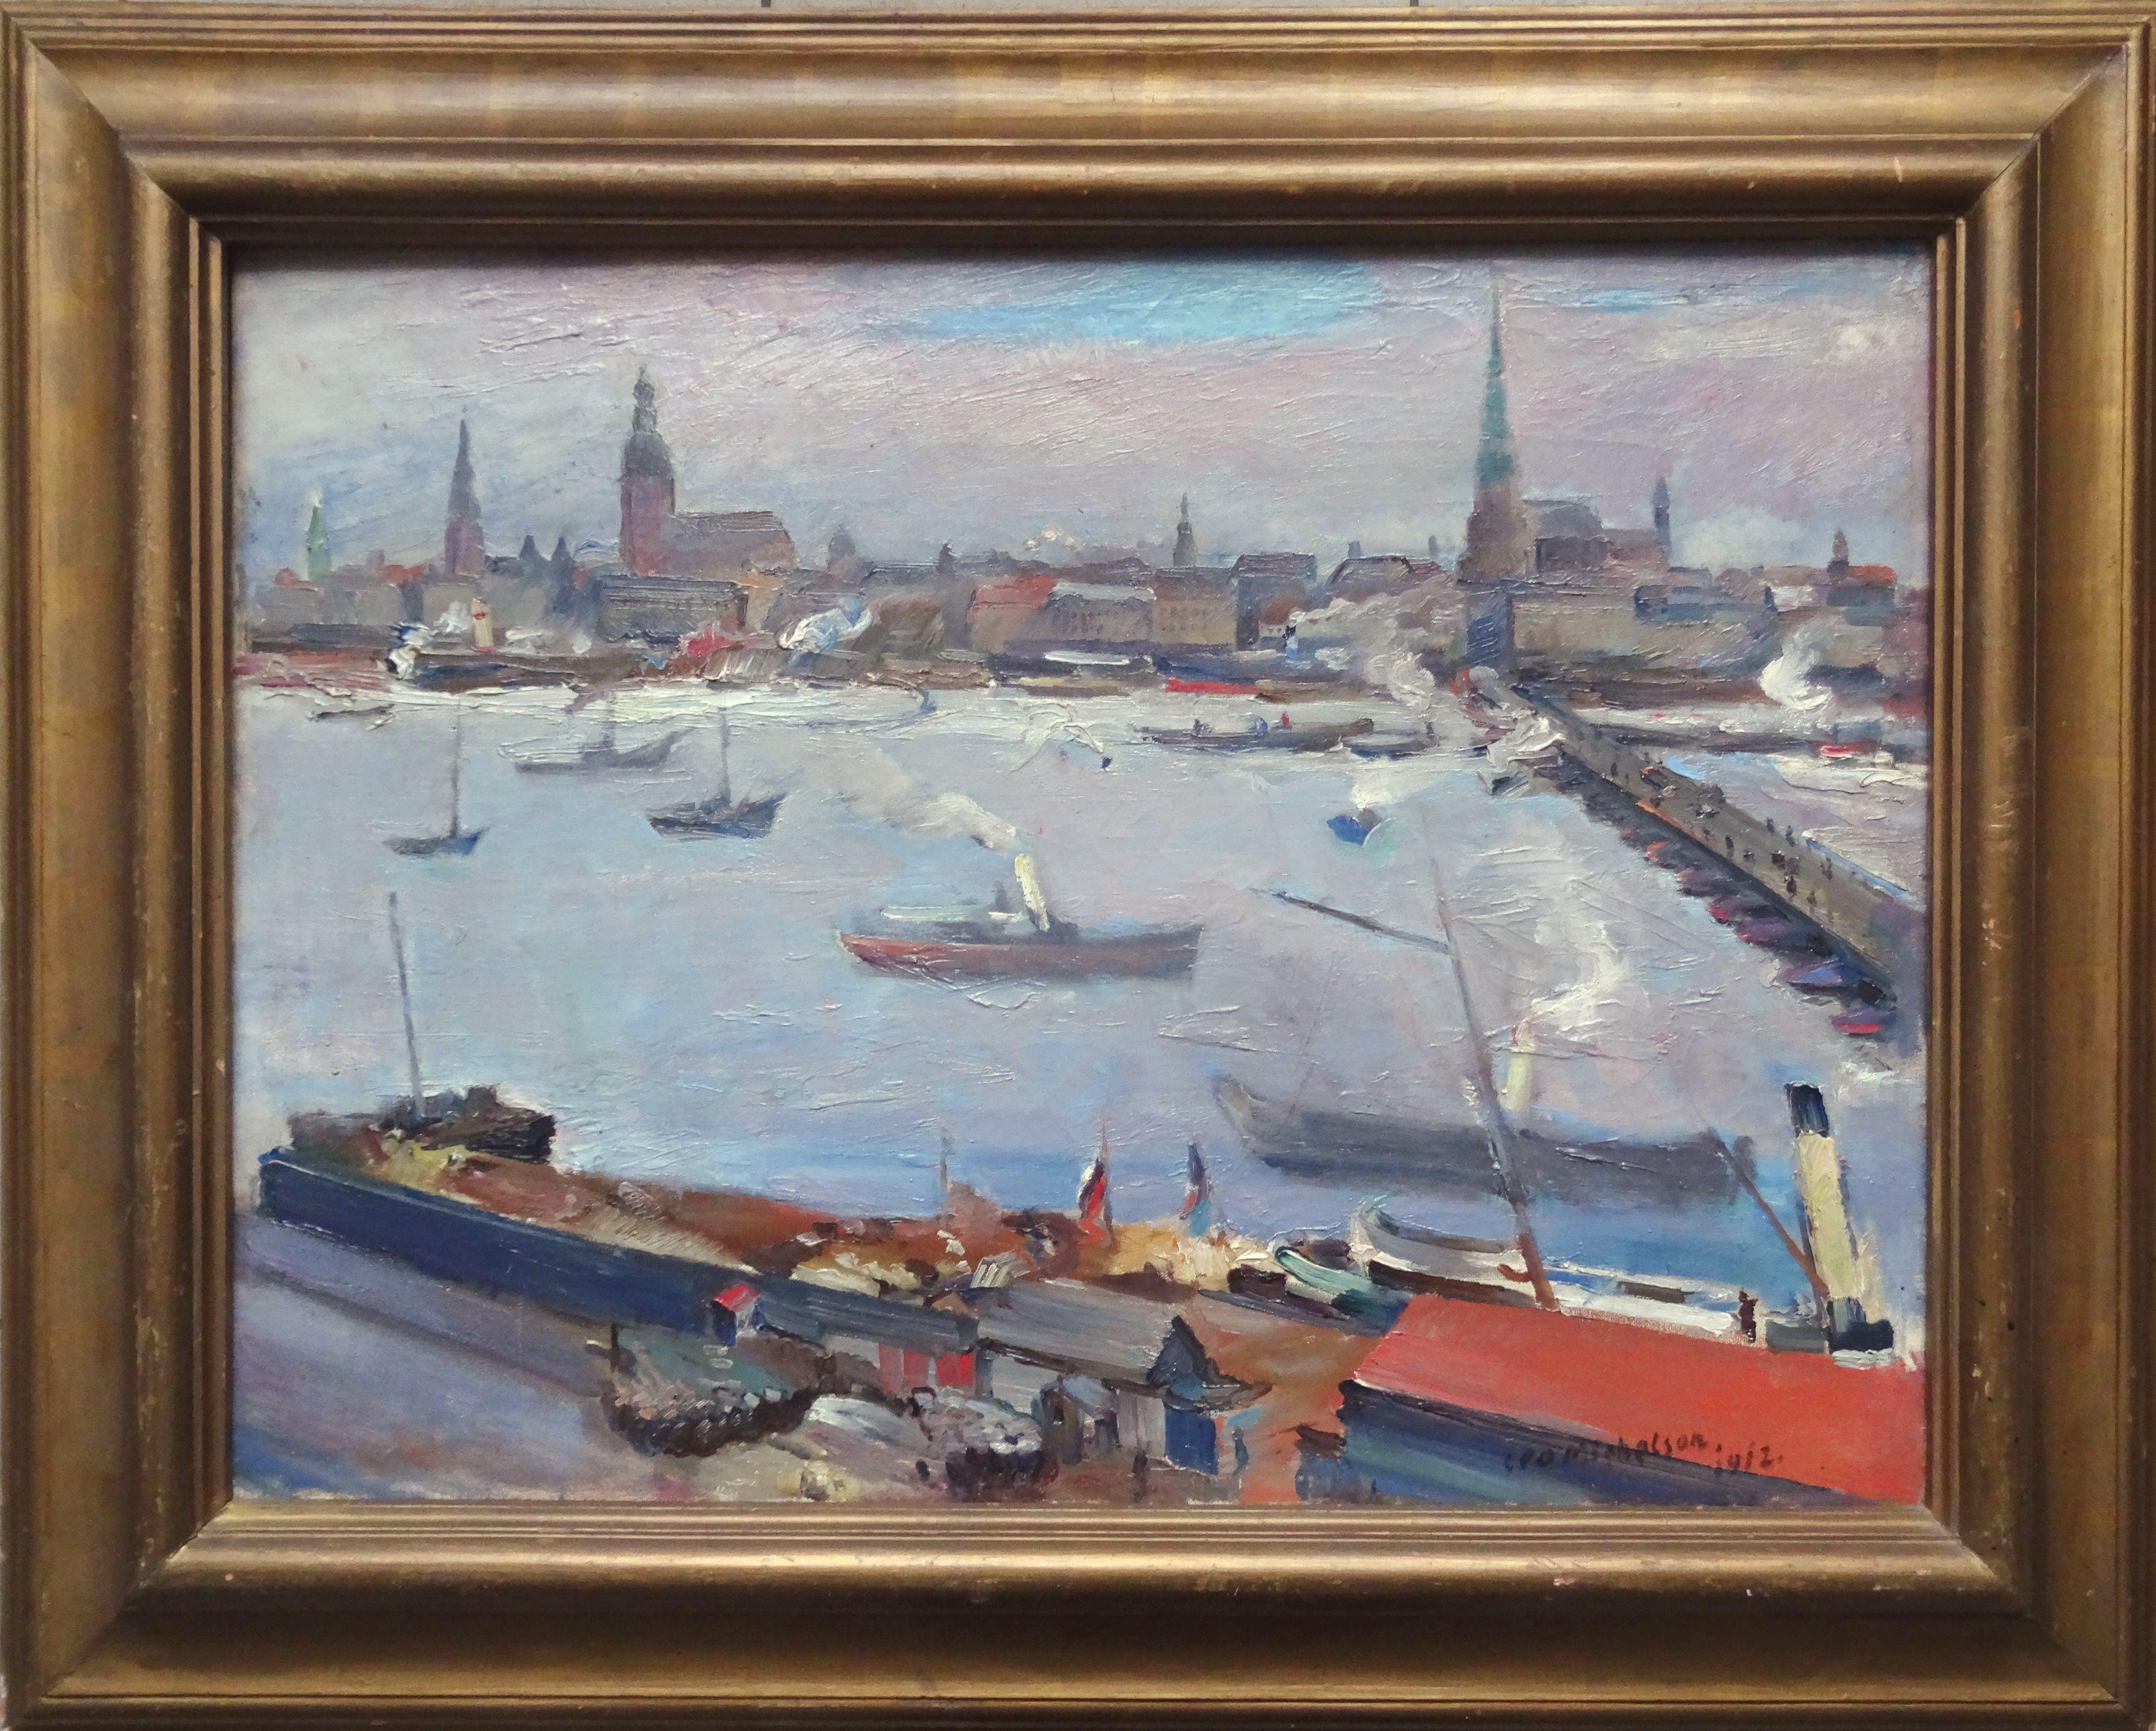 Riga city. 1912. Oil on canvas, 59x78 cm - Painting by Leo Michelson 